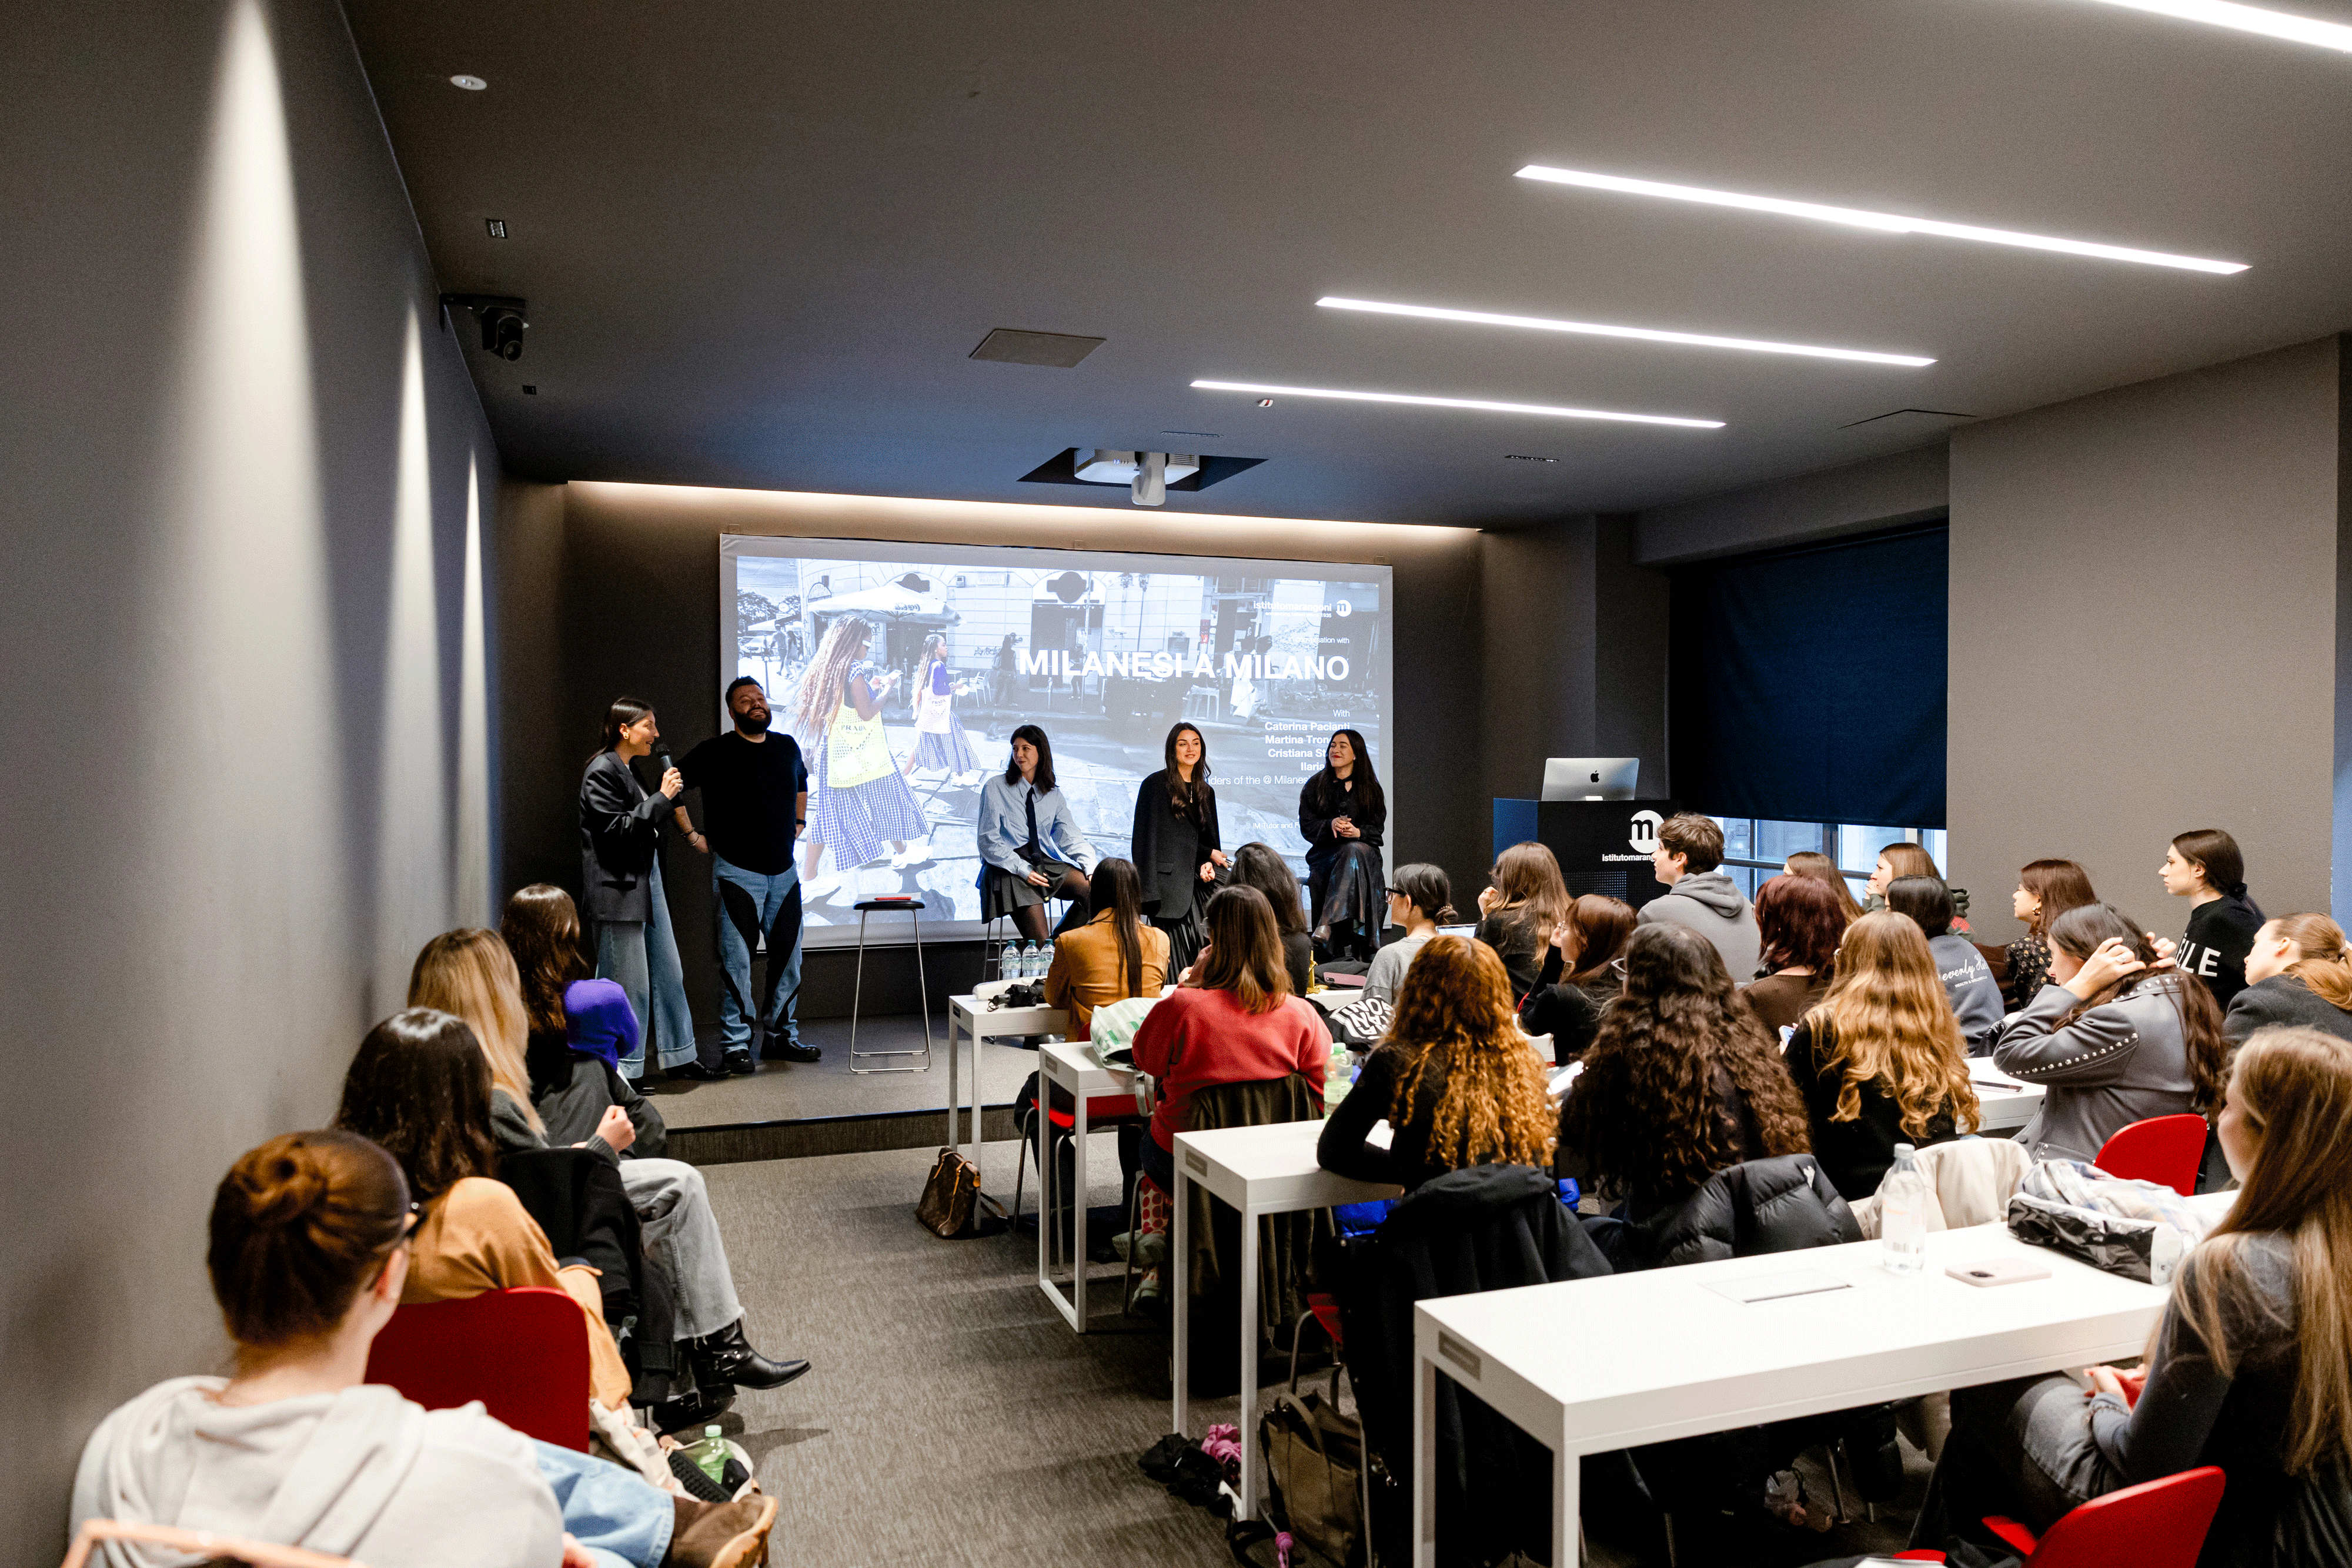 The team behind 'Milanesi a Milano' during an exclusive talk at Istituto Marangoni in Milan